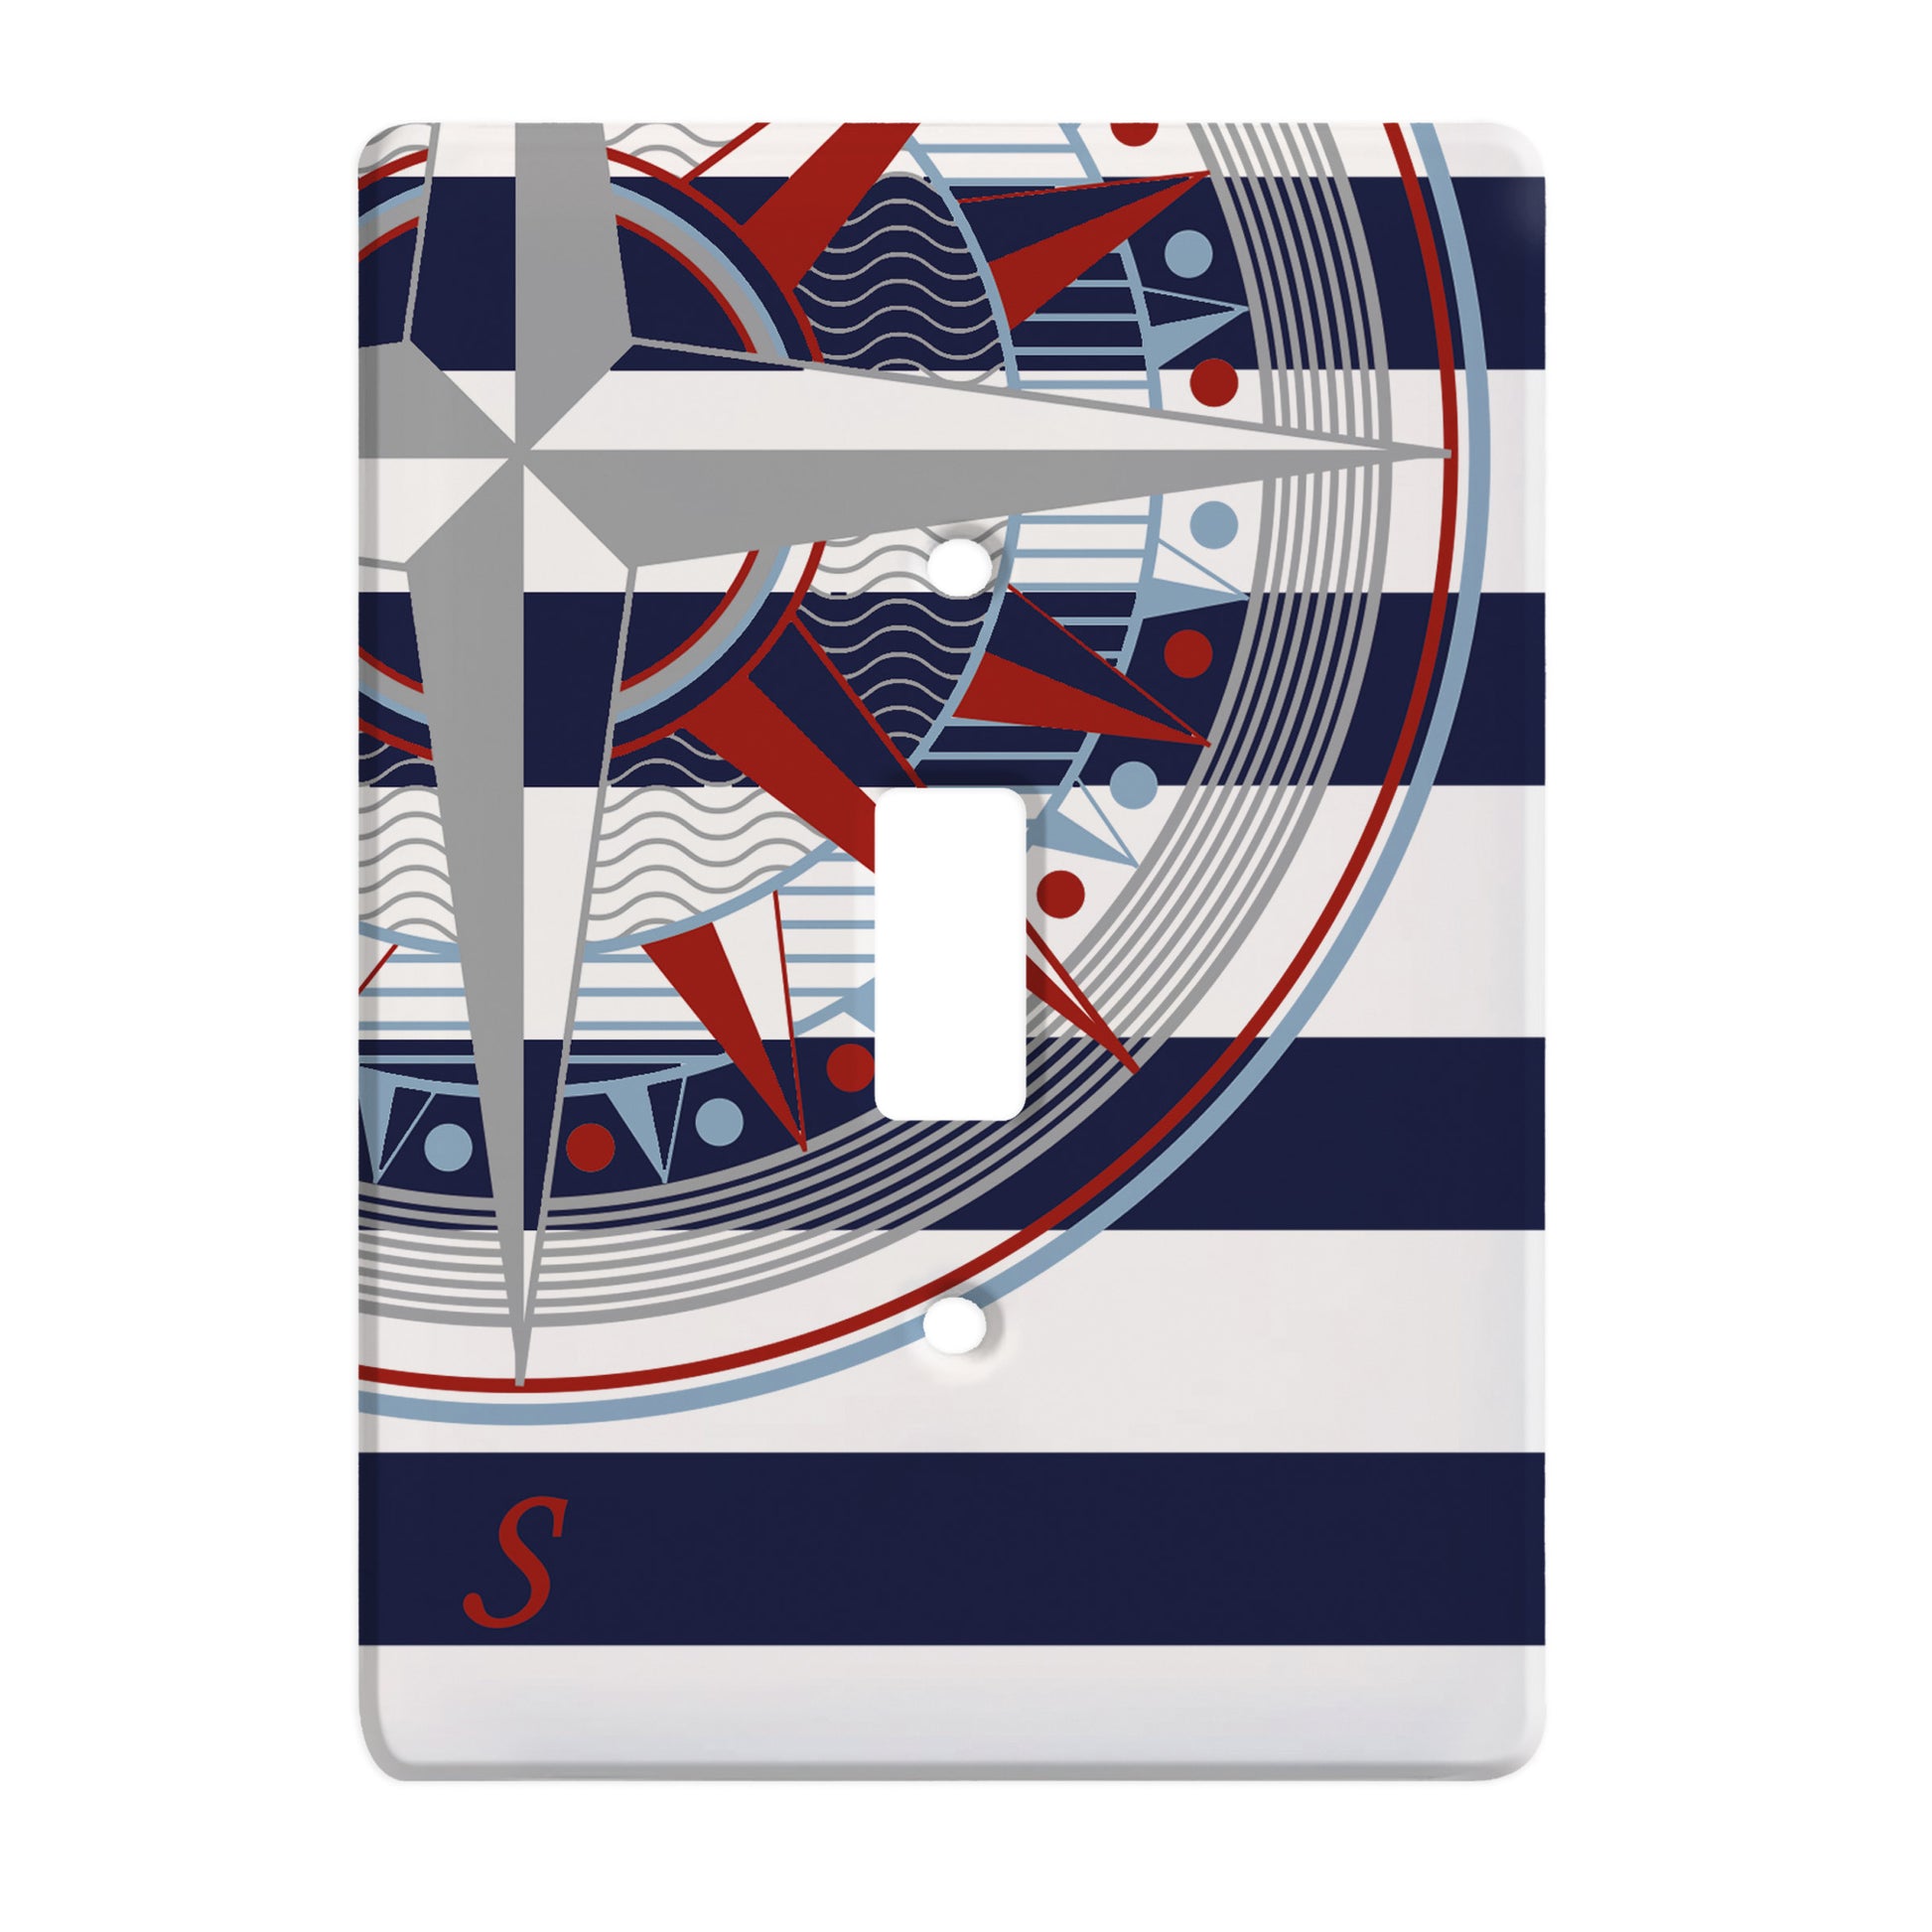 ceramic single toggle switch plate featuring navy and white stripes behind a nautical compass graphic.